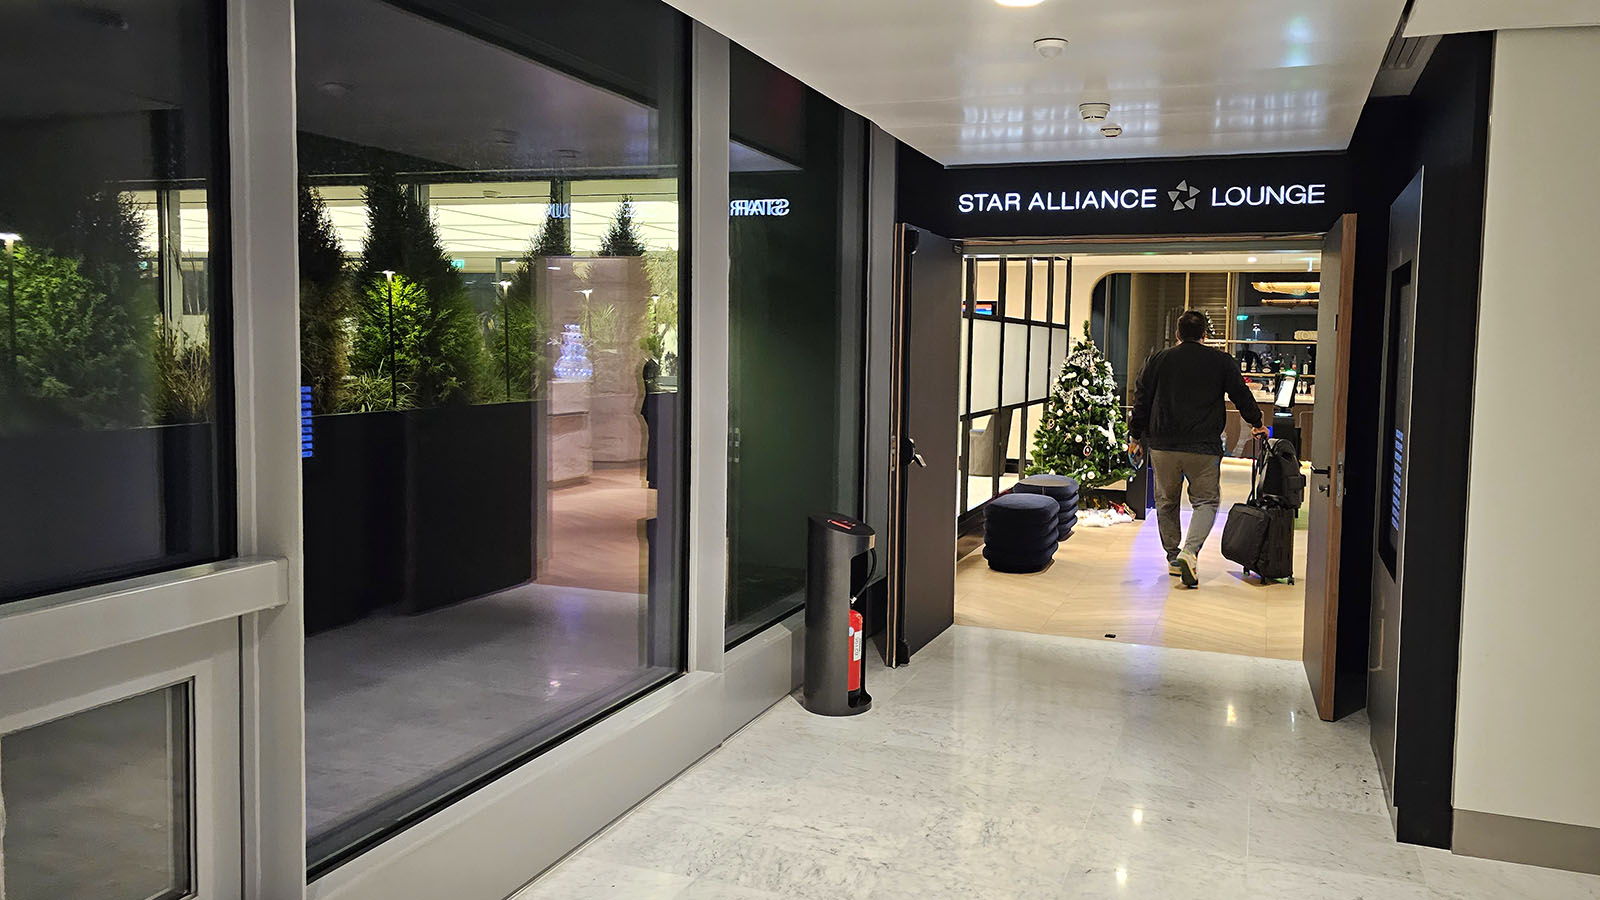 Approaching reception at the Star Alliance Lounge, Paris